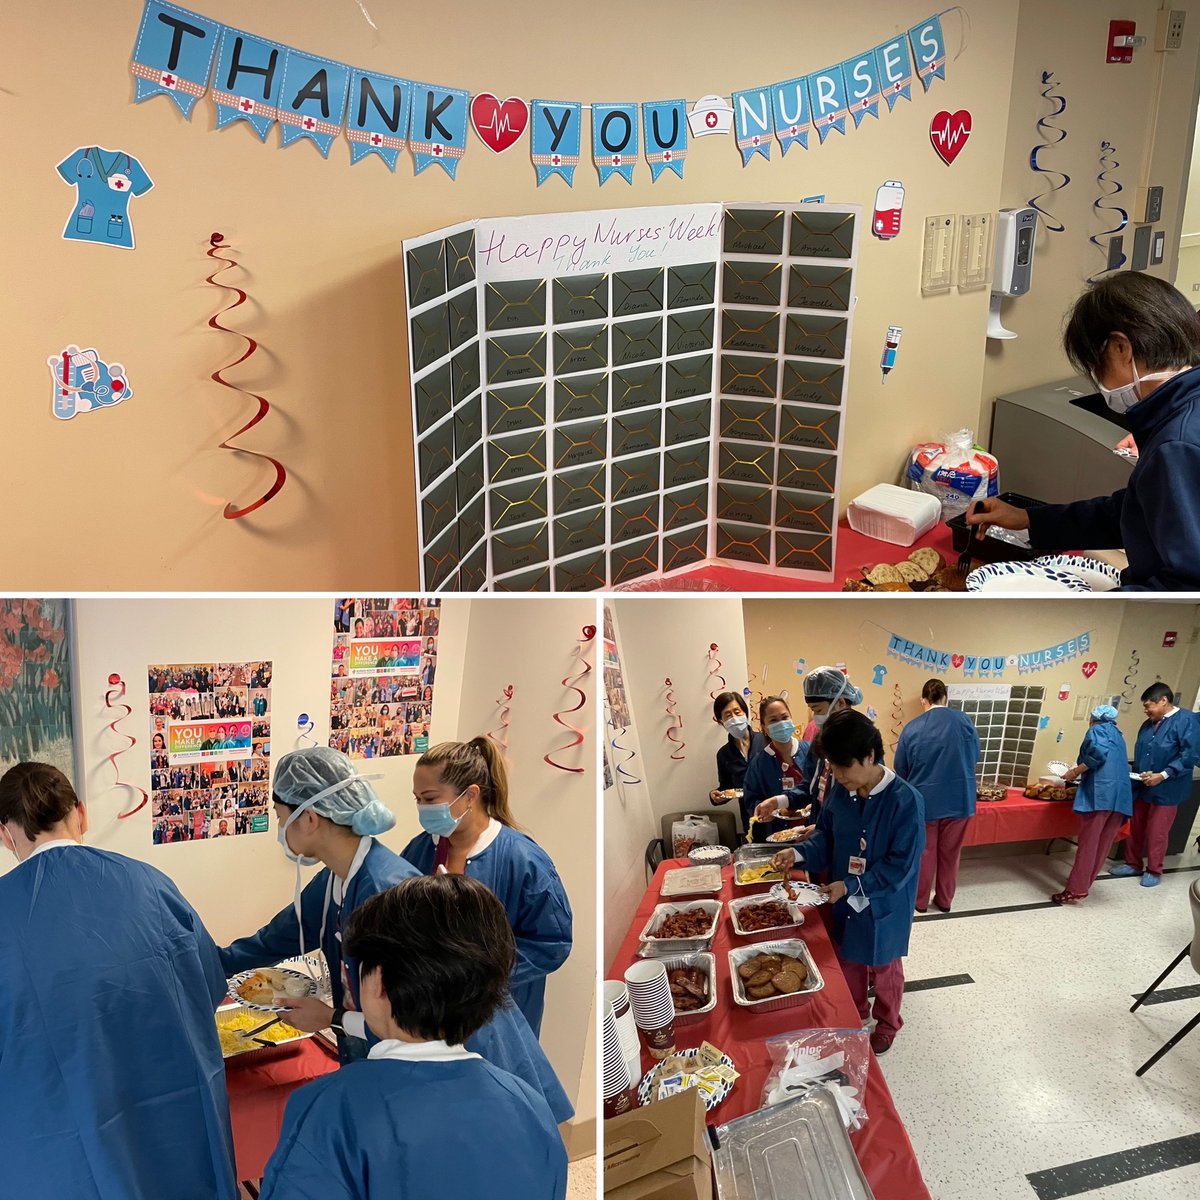 HAPPY NURSES WEEK to all! We are so grateful for all of the hard work and dedication of our nurses. We are kicking off Nurses week with a hot breakfast, games and thank you cards! #NursesWeek2023